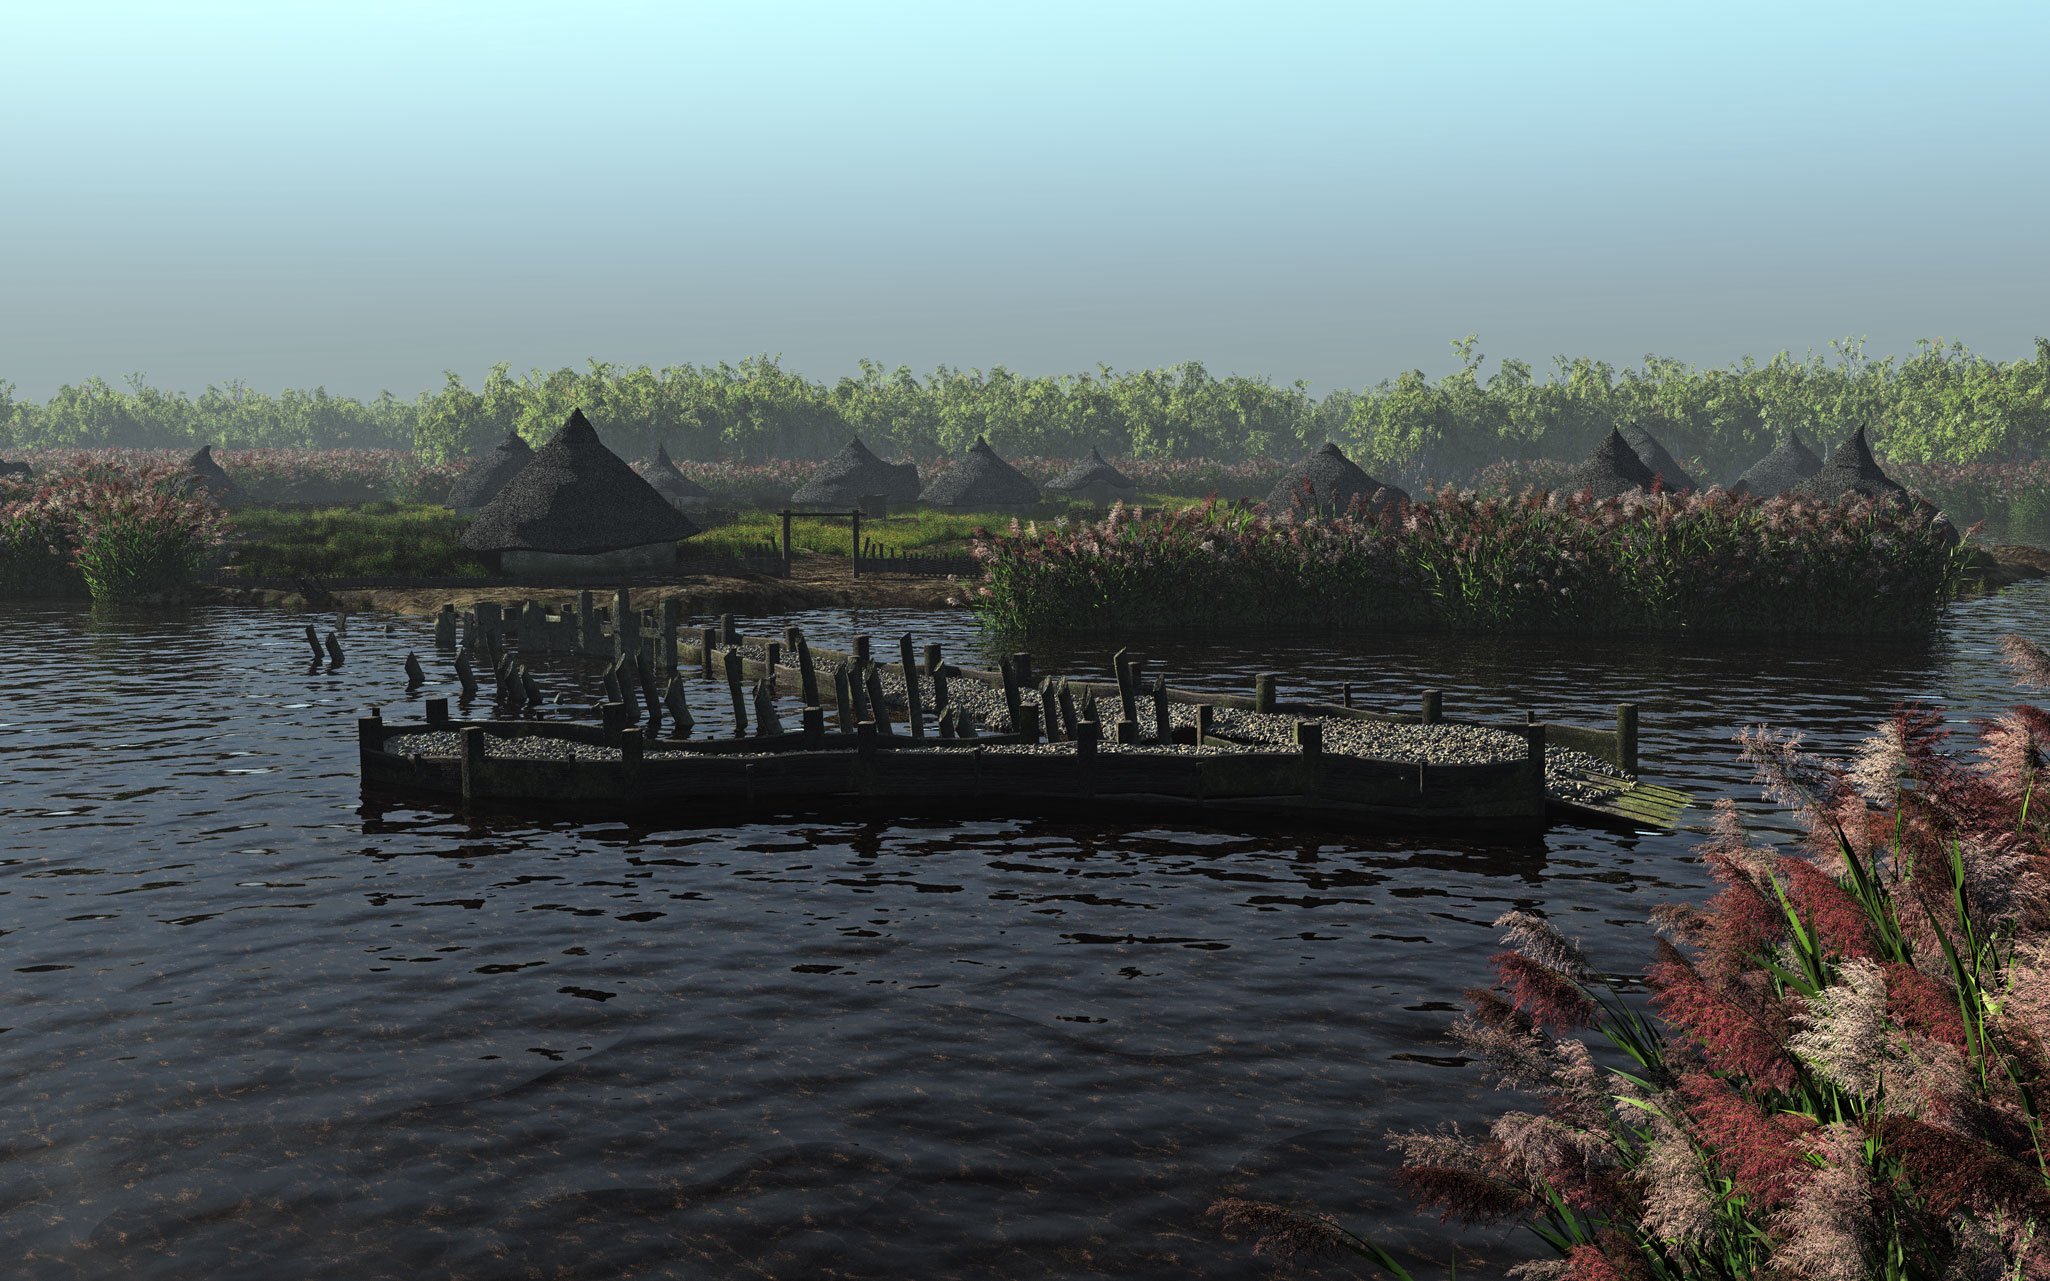 Reconstruction of a prehistoric lake village with roundhouses and woodland in the background; in the foreground is a timber jetty structure.